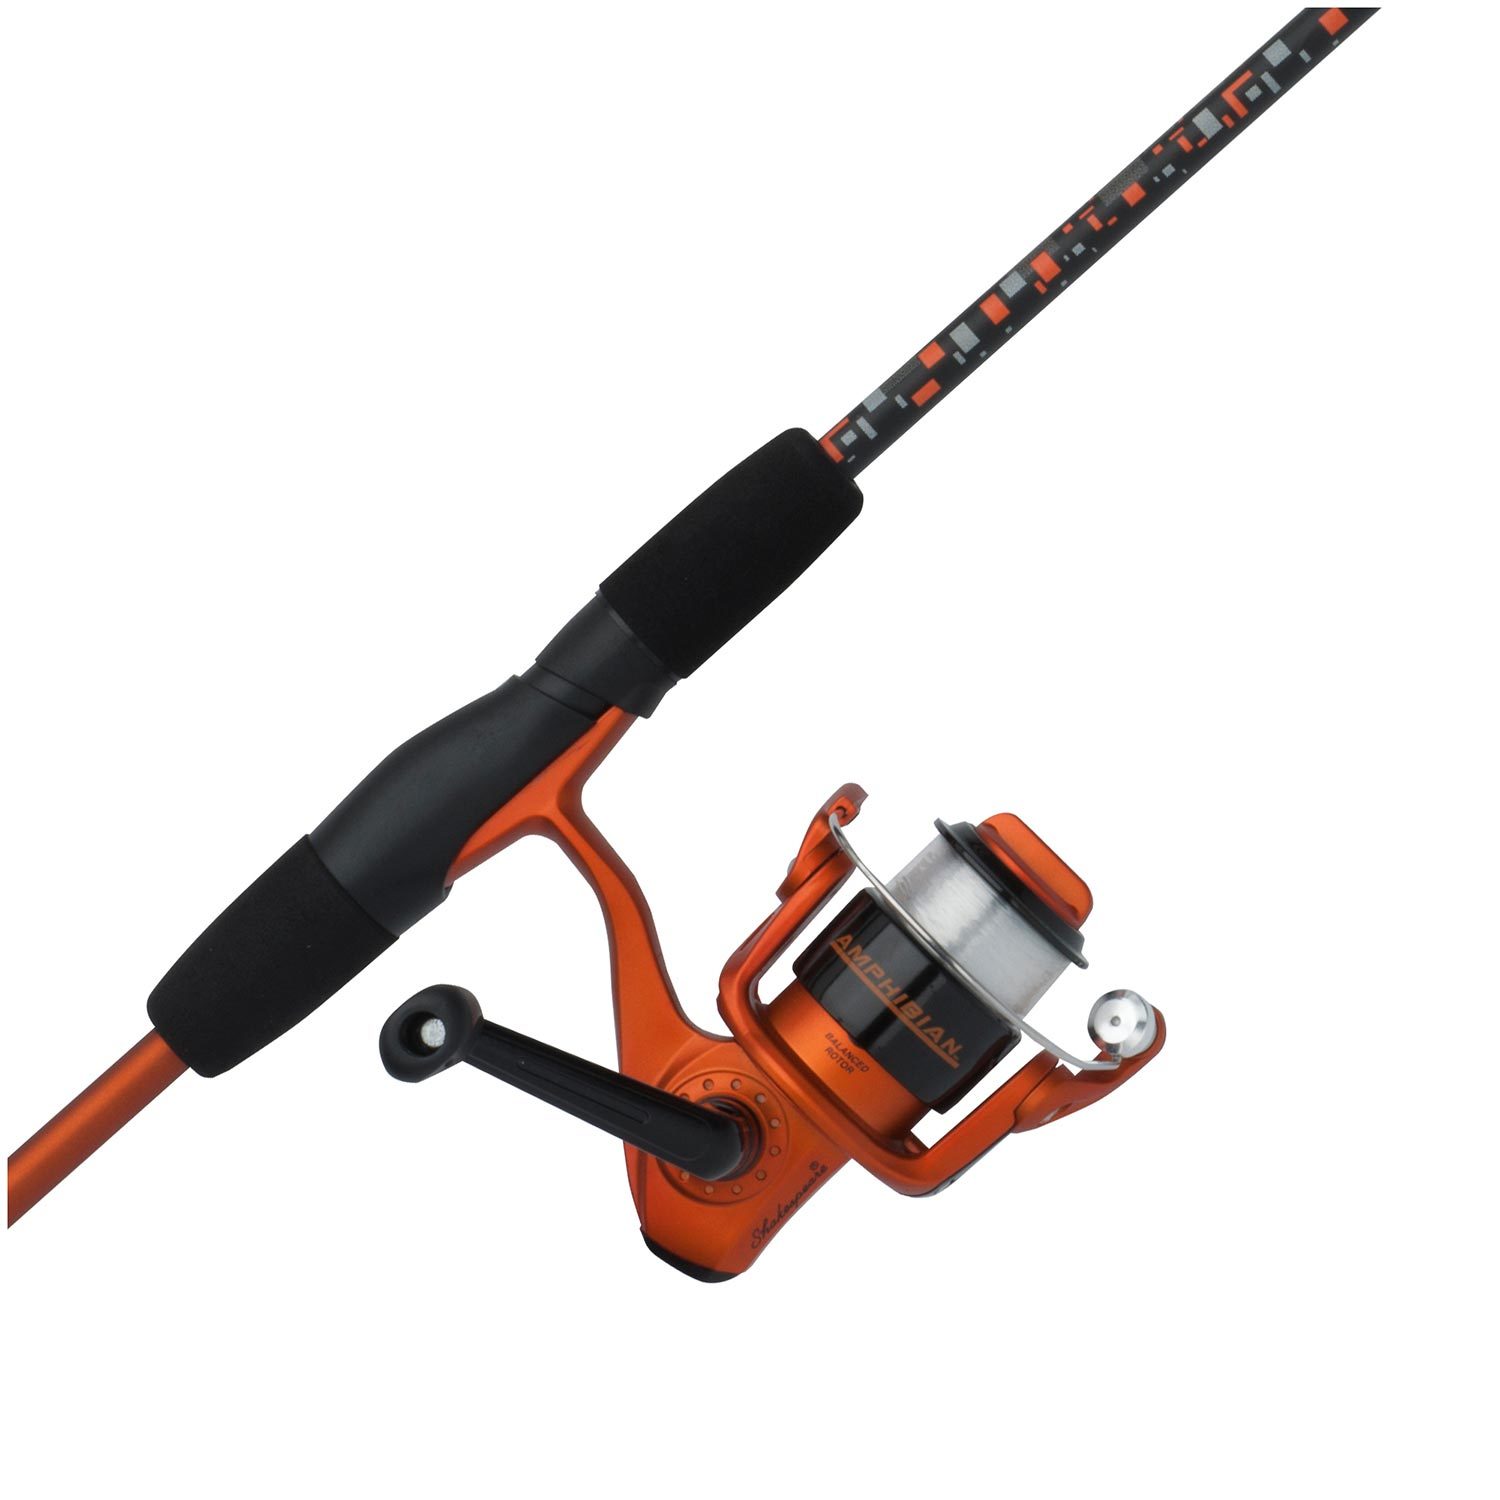 78 in. Pole Pink Fiberglass Rod and Reel Combo Medium Action, Size